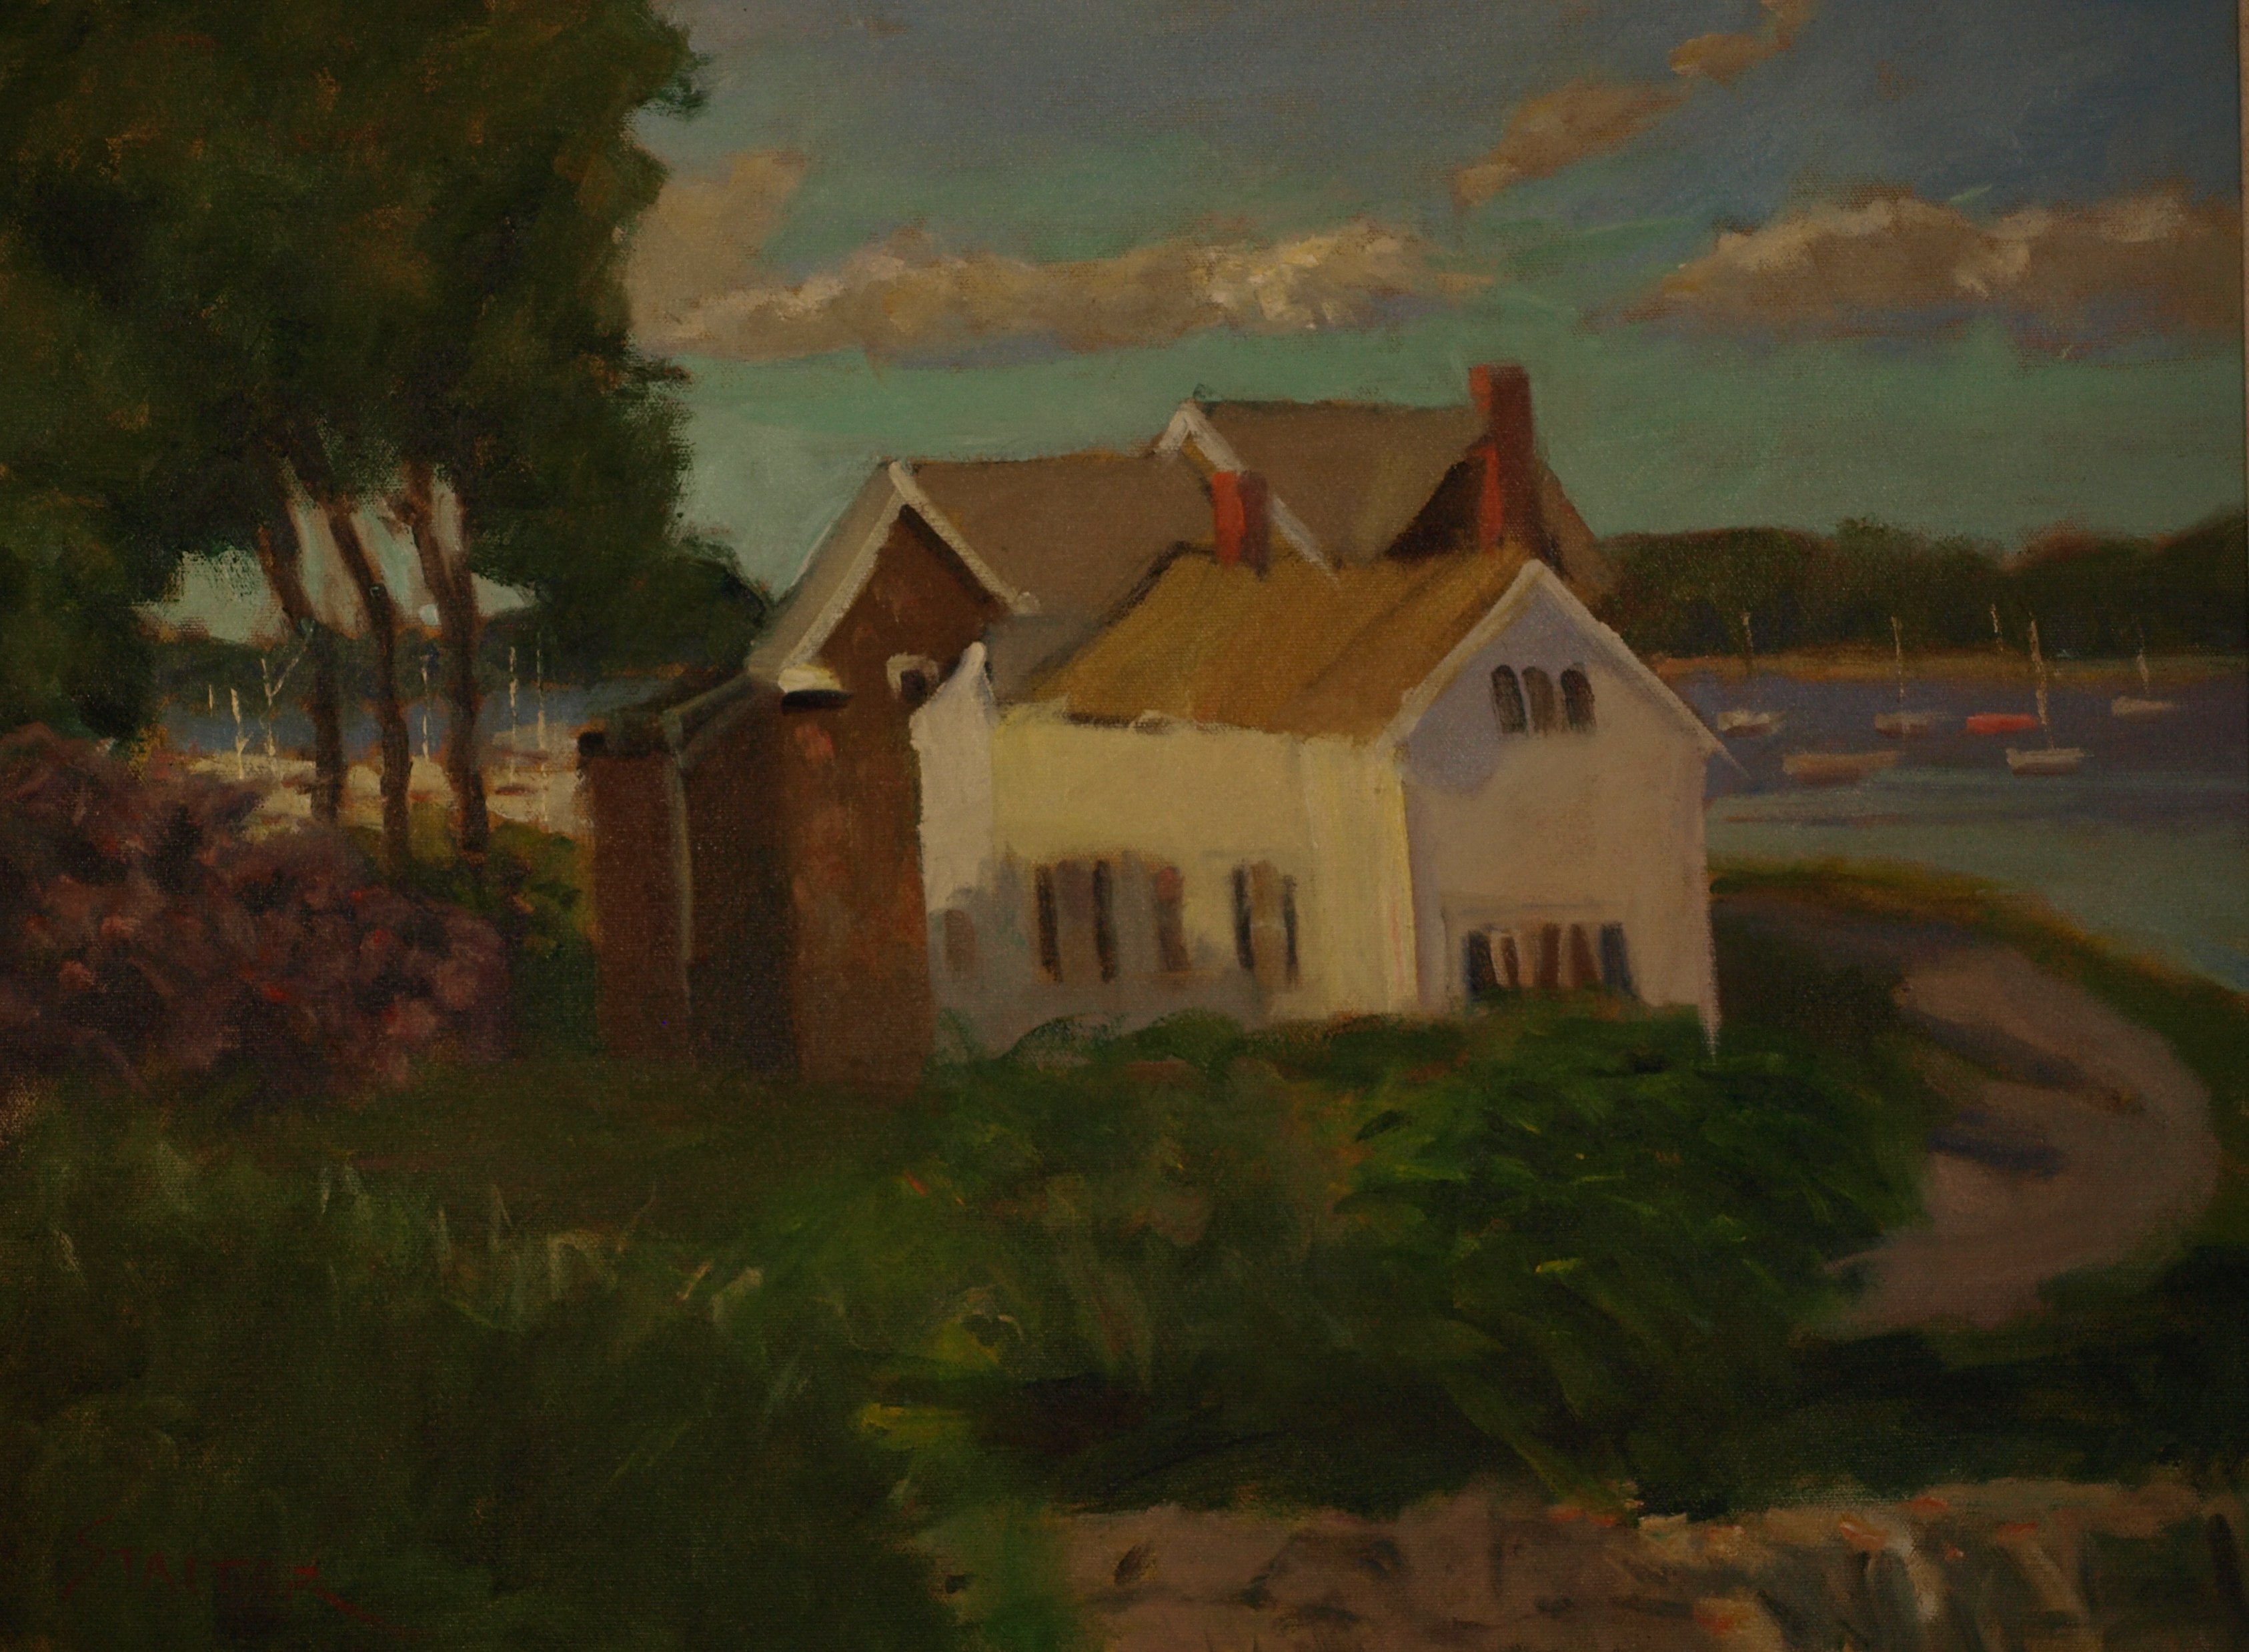 Noank Shoreline, Oil on Canvas, 18 x 24 Inches, by Richard Stalter, $850